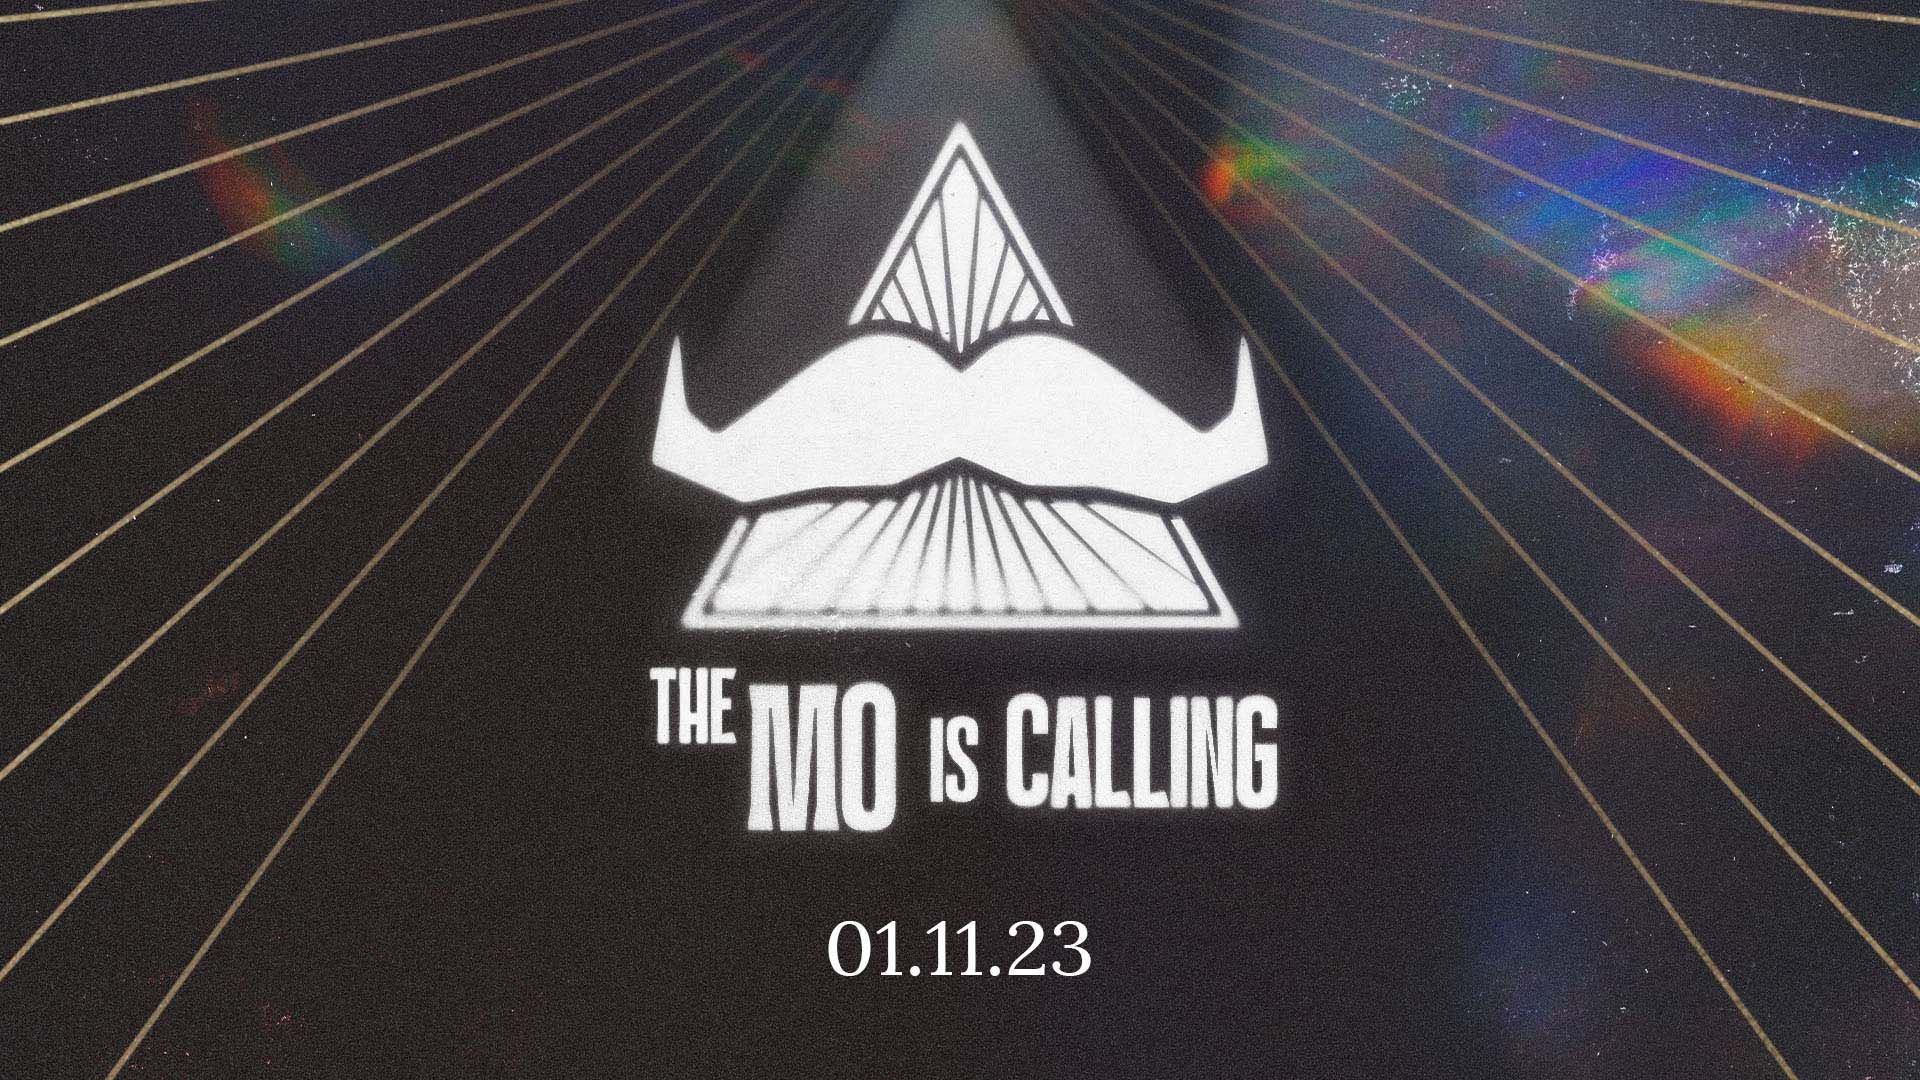 A stylised illustration of a moustache, surmounted on a mystical triangle. Superimposed text says: "The Mo Is Calling". It points to a date of November 1, 2023.